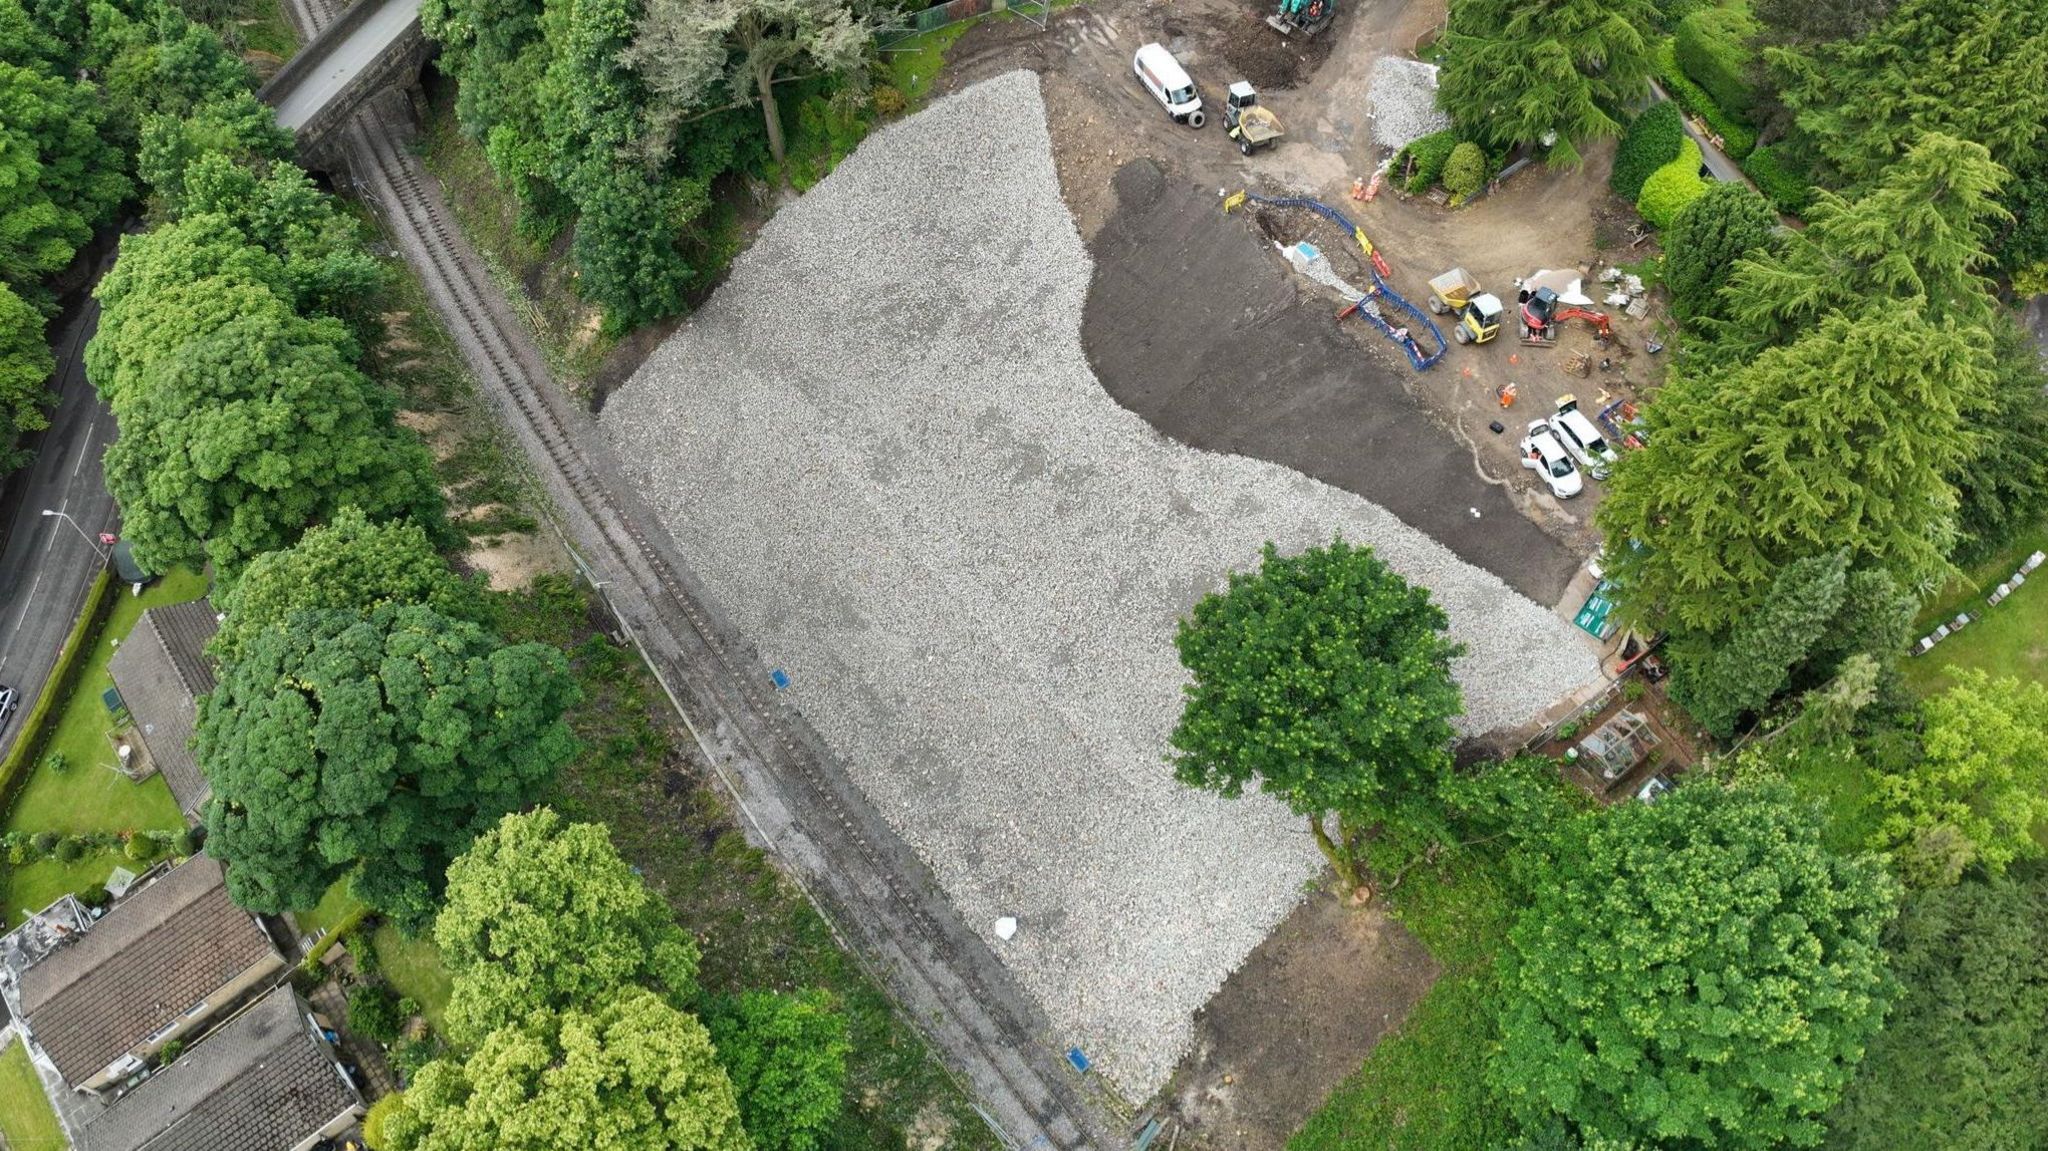 An aerial view showing the site of two houses near the railway line which had to be demolished due to the landslip